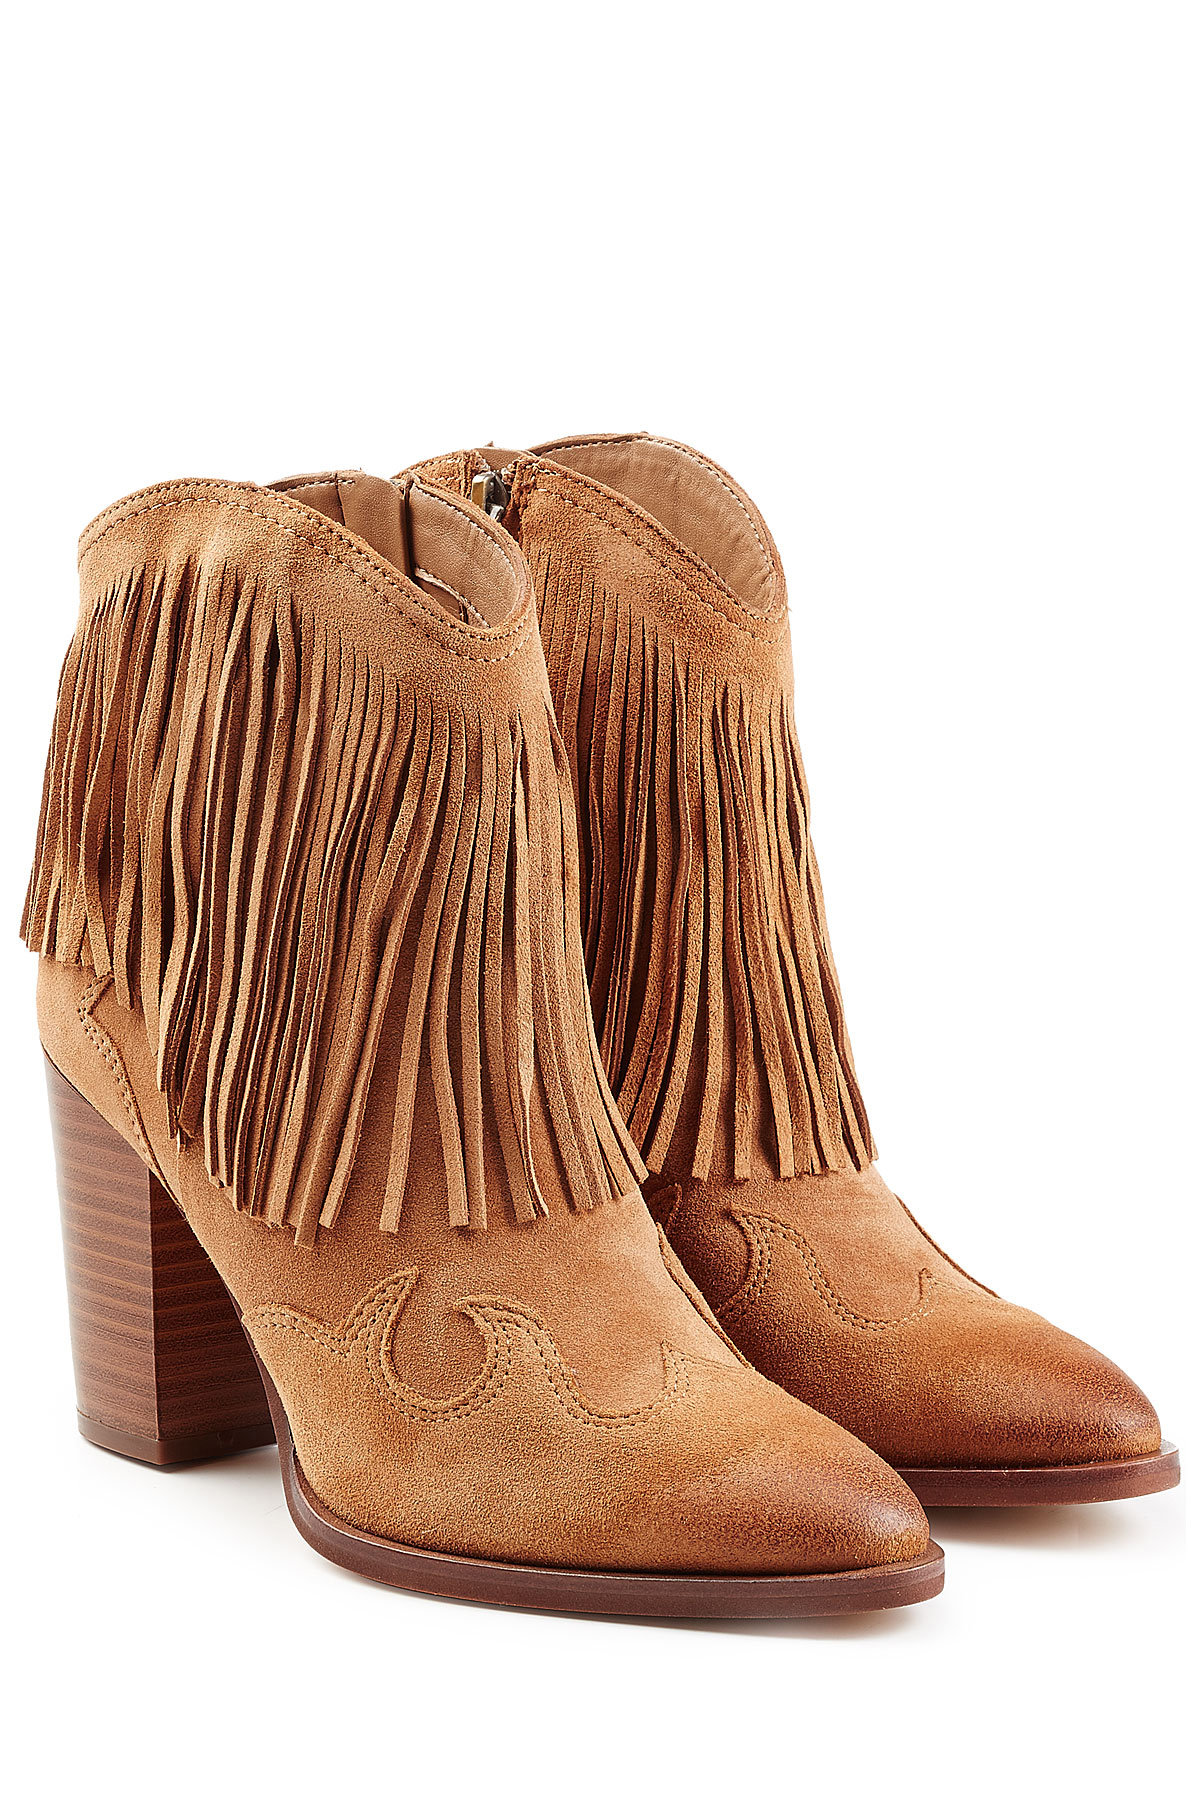 Sam Edelman - Suede Ankle Boots with Fringe